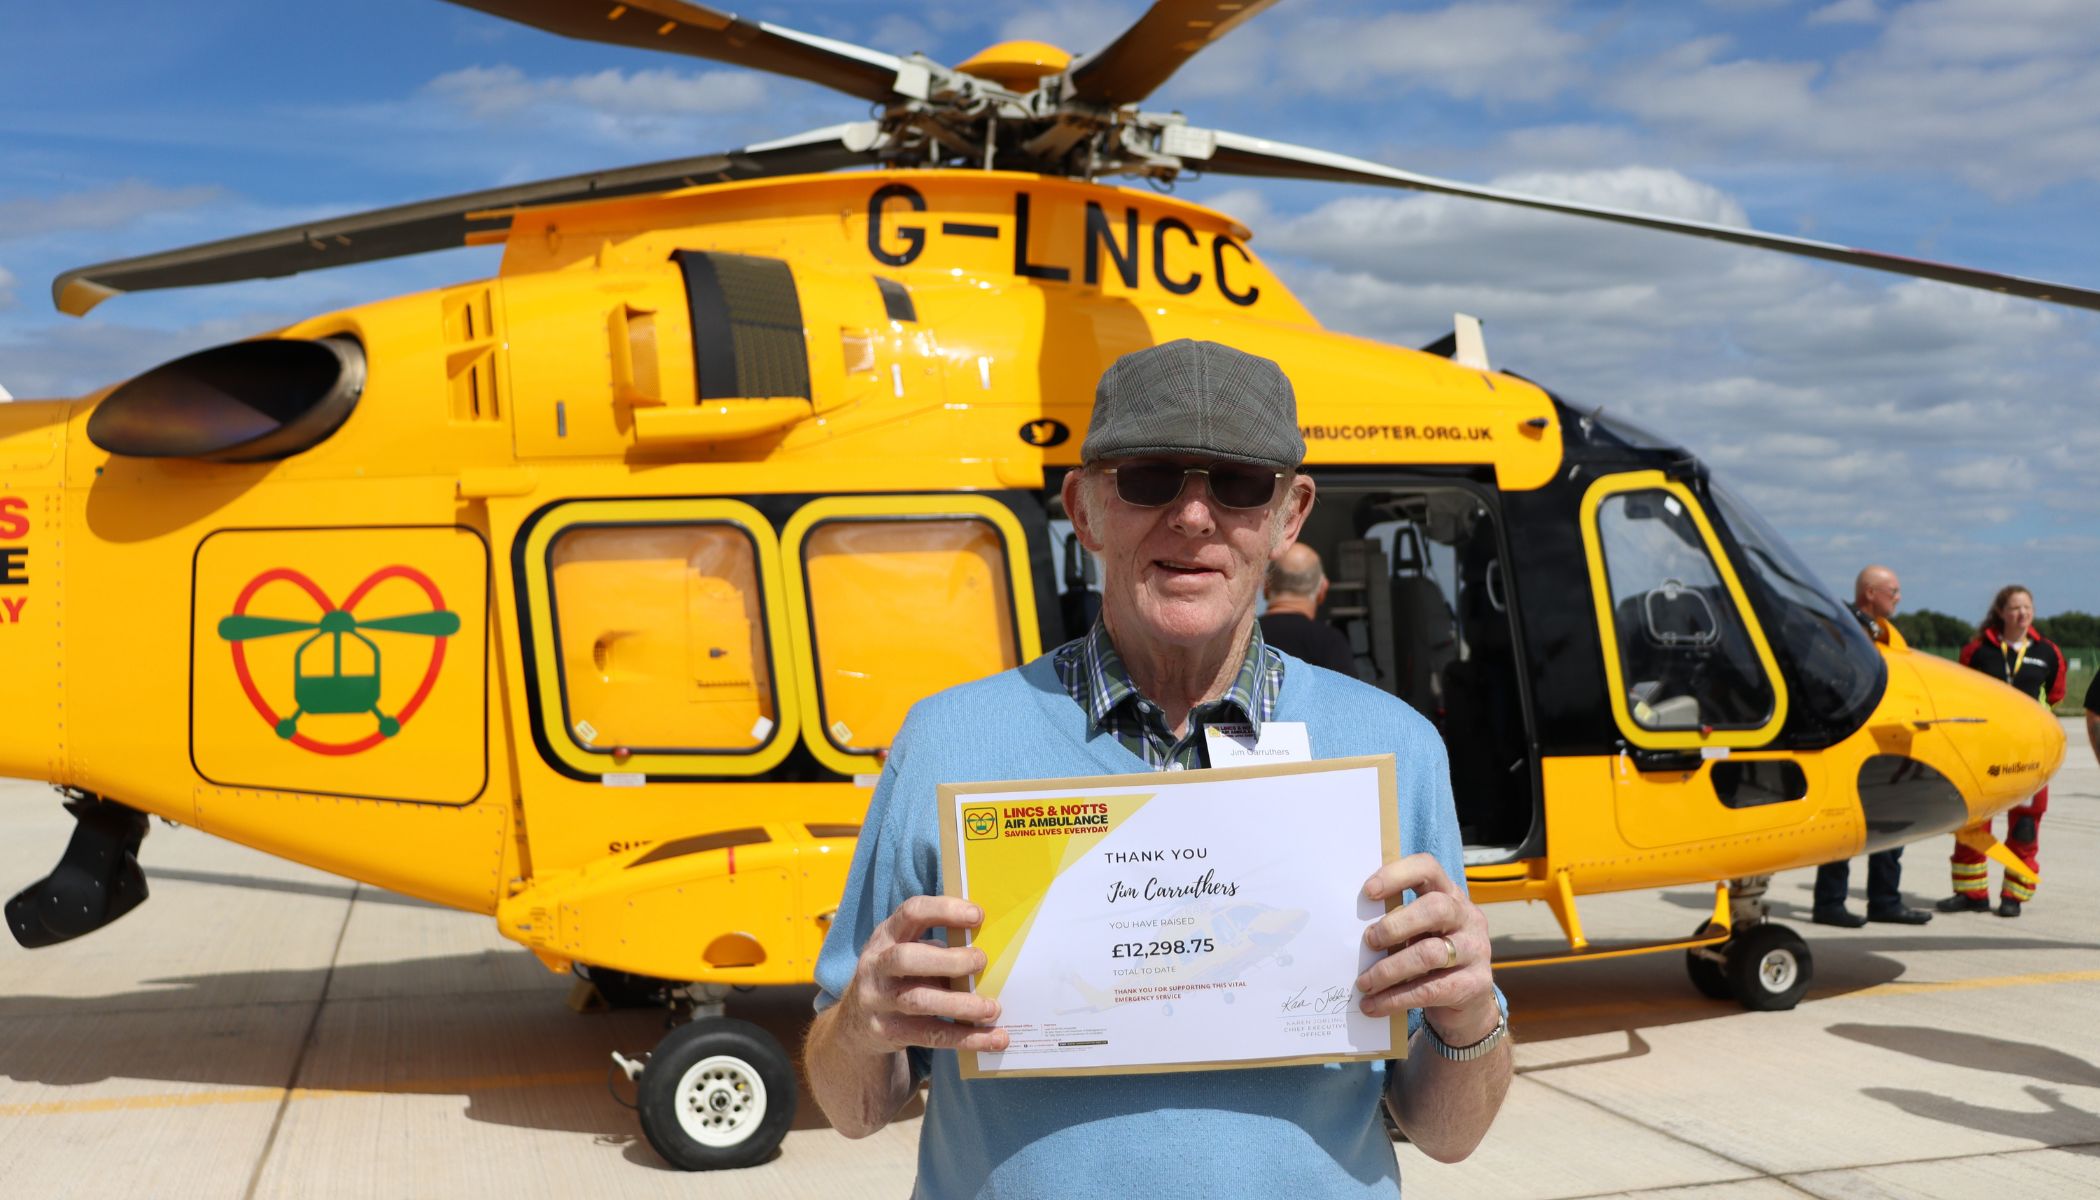 Supporter stood with a certificate in front of our helicopter